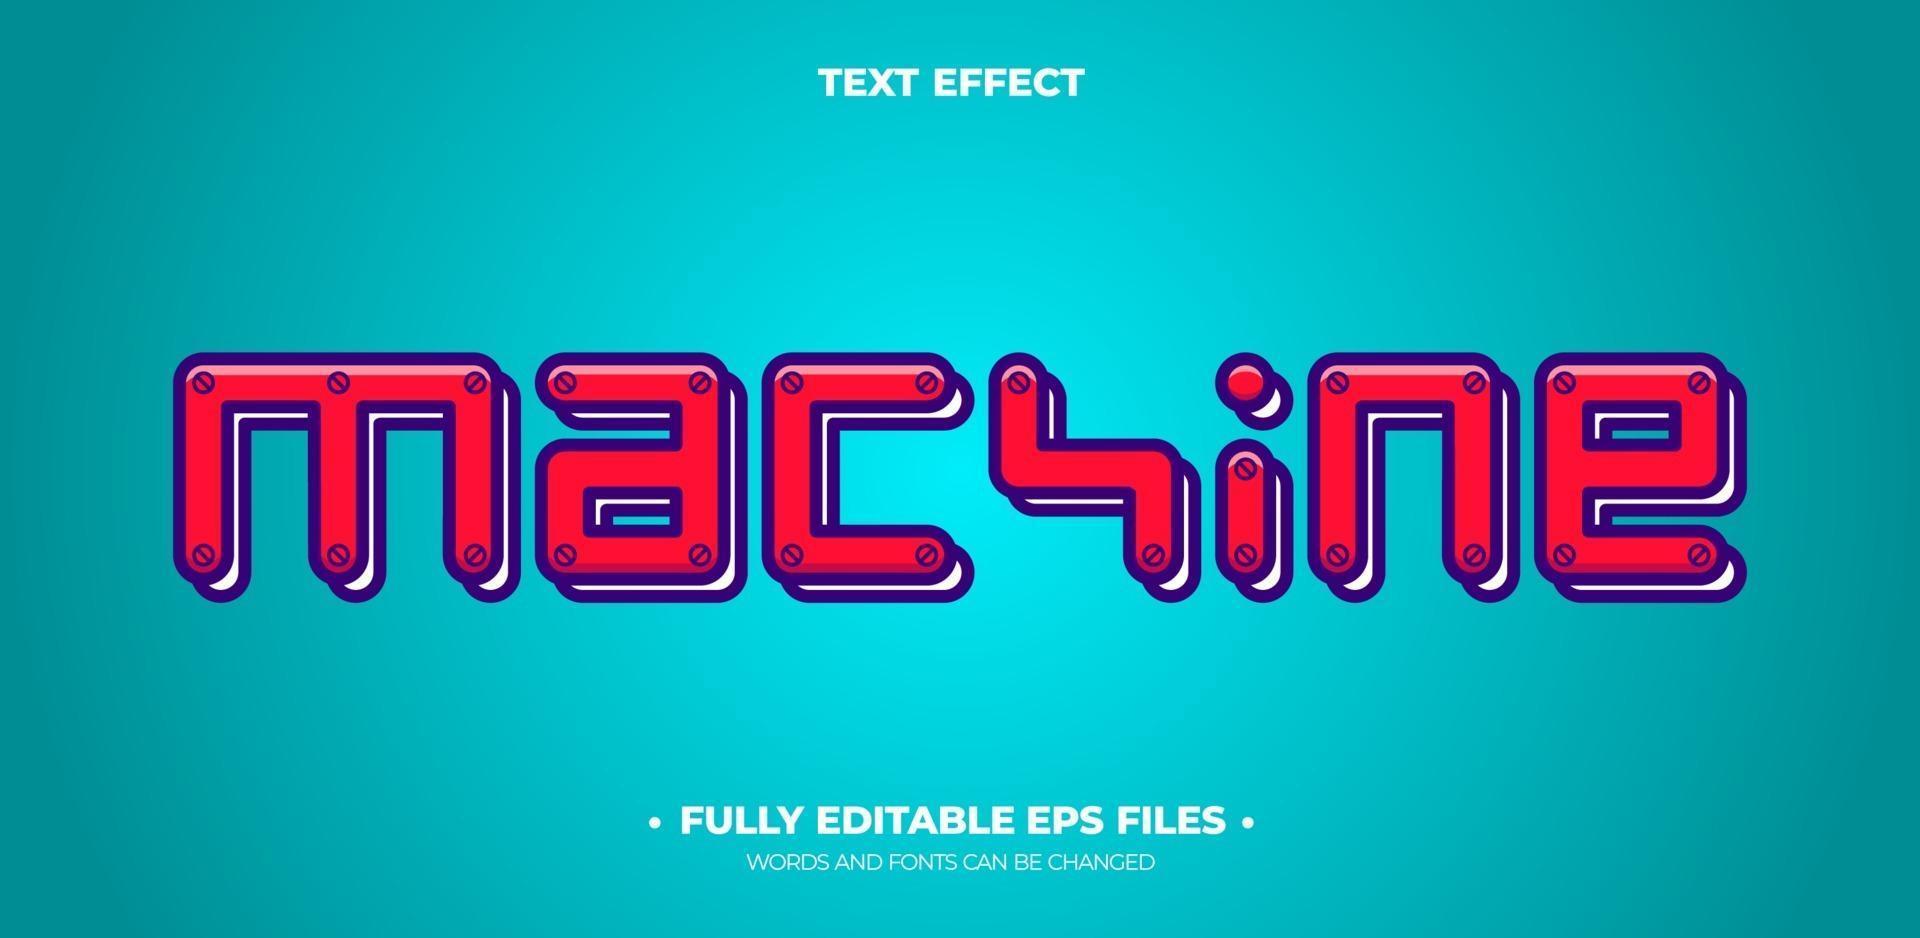 Metal or machine themed text effects vector